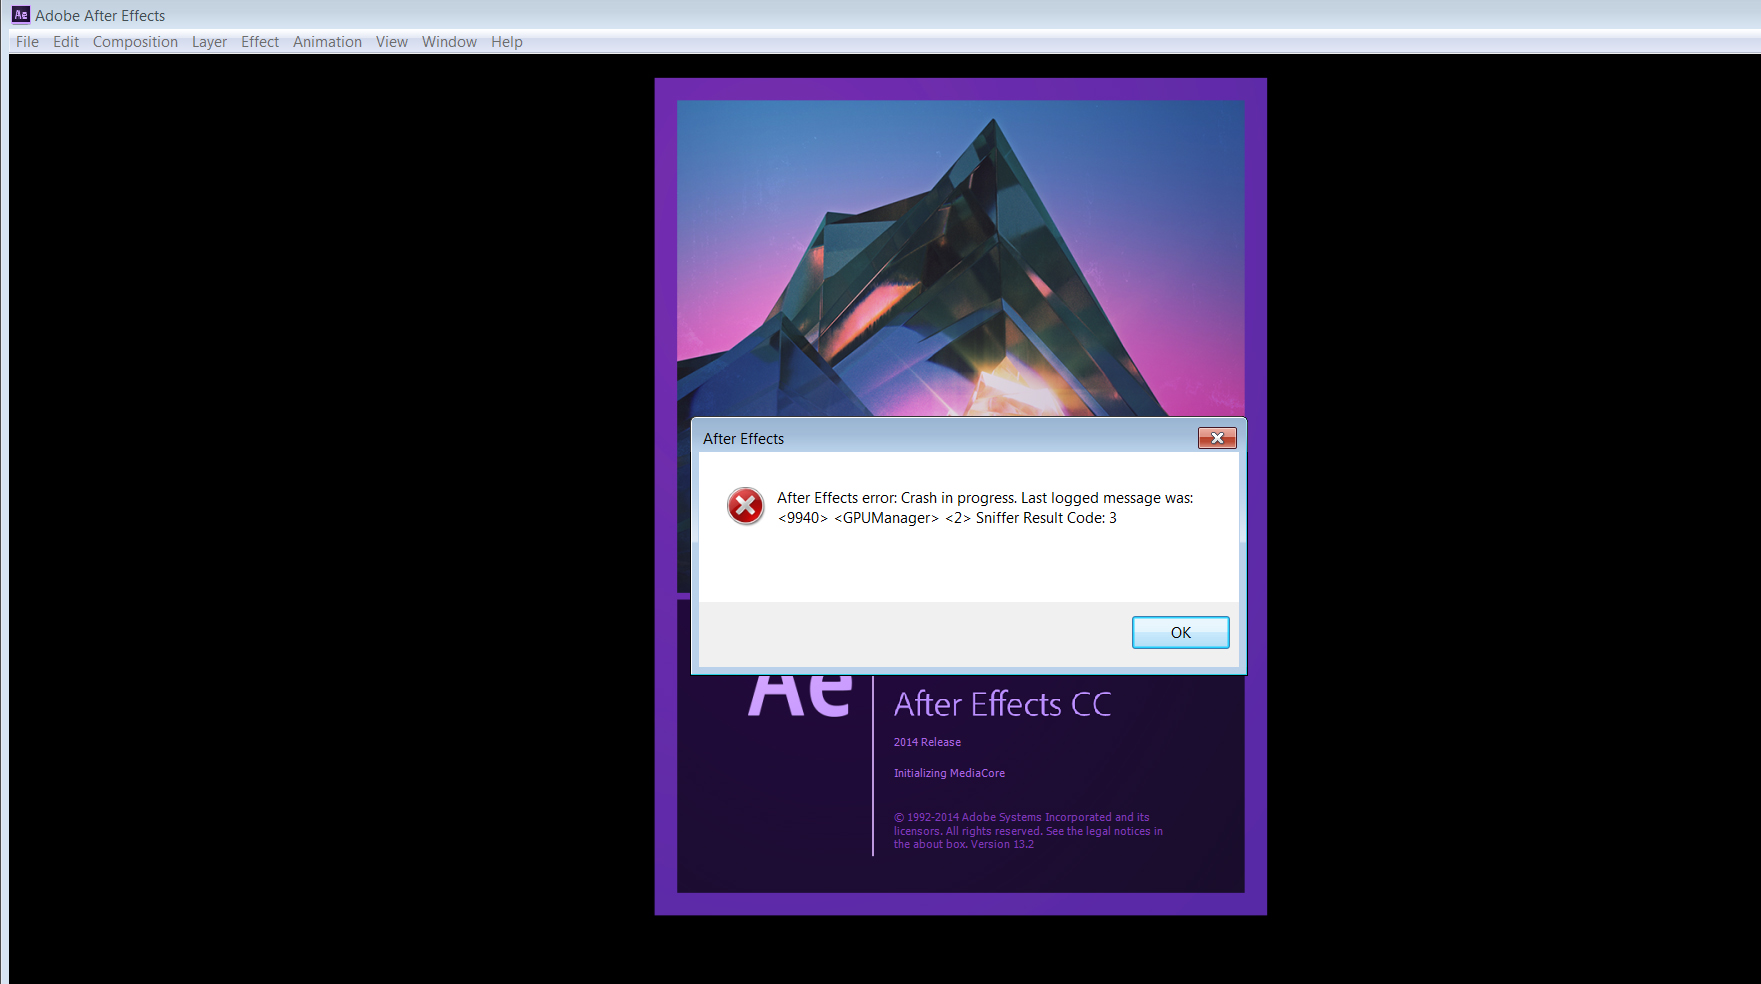 pirated adobe cc 2015 crack says sign in is required